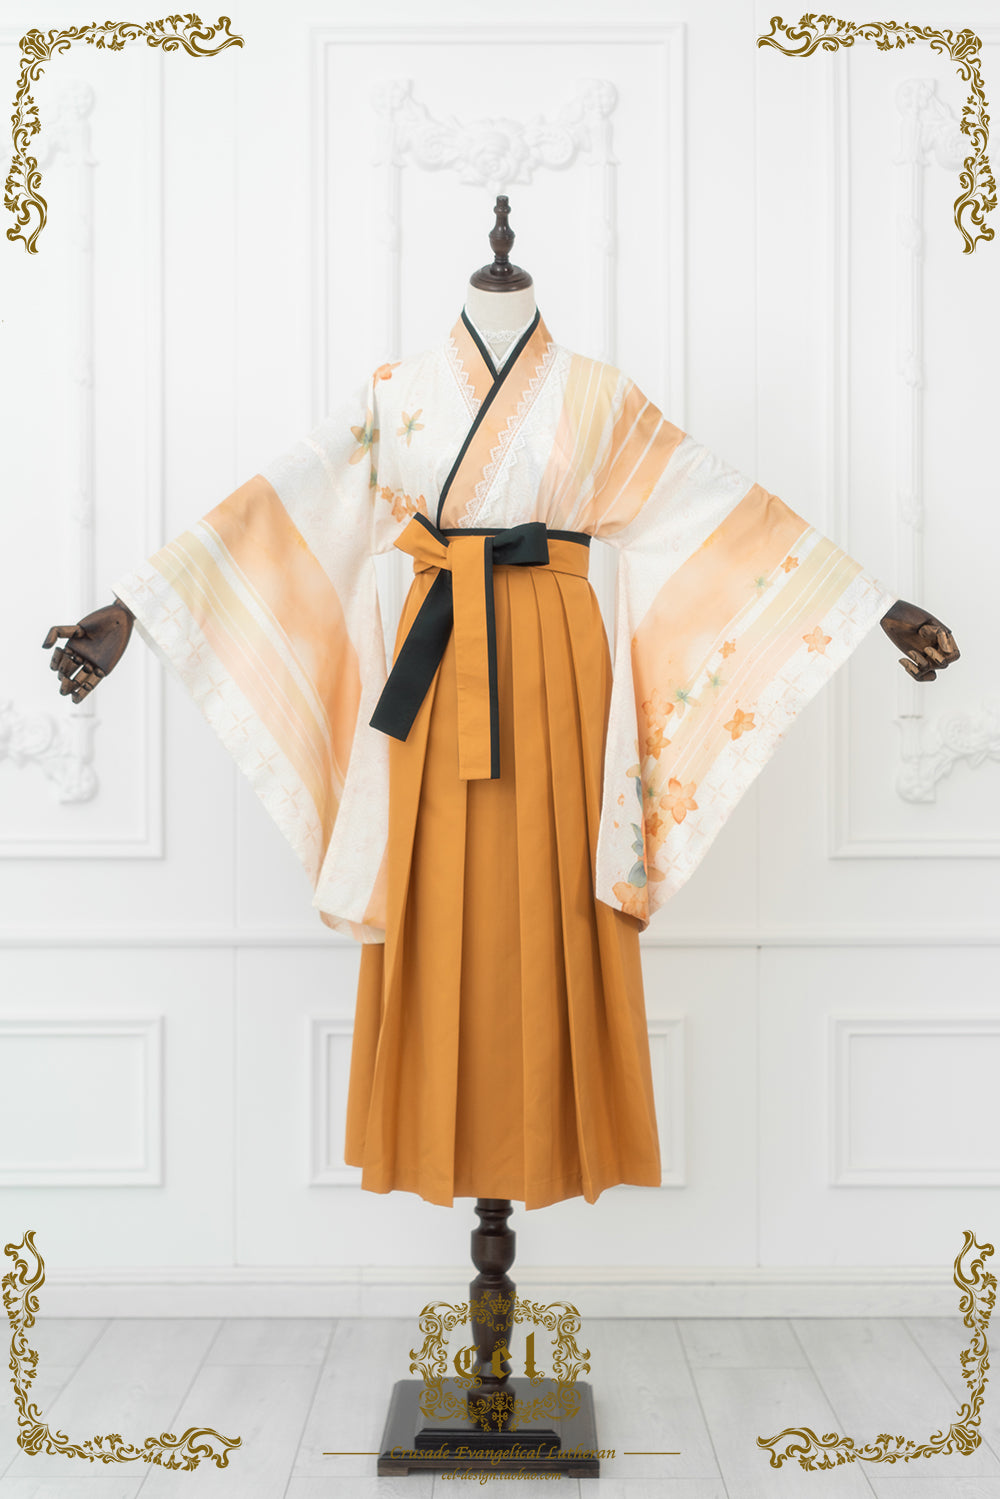 Japanese-style print and lace kimono-style tops [20% off when purchased together]